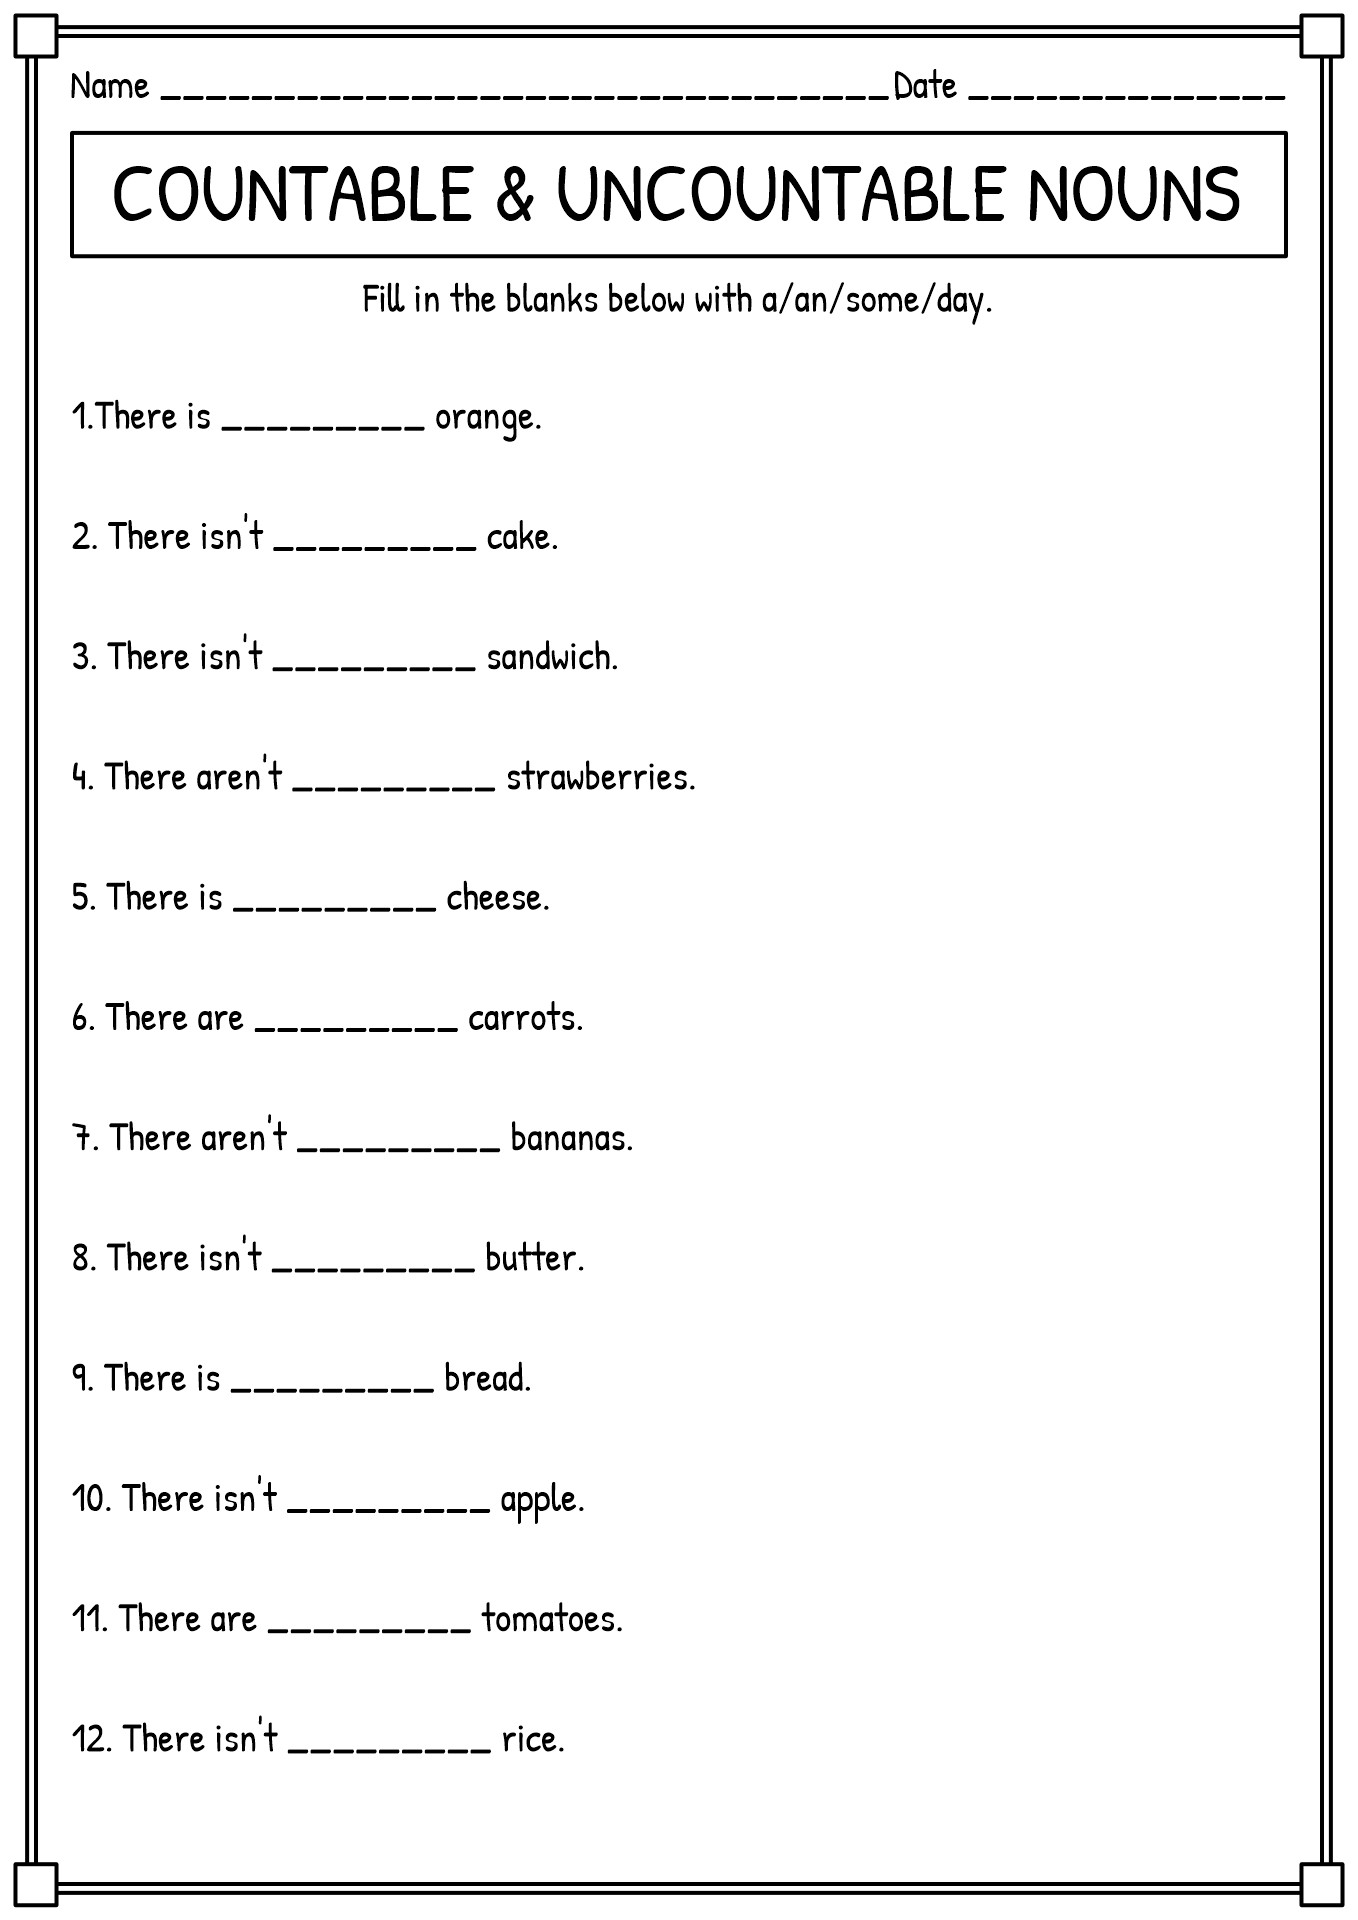 Countable and Uncountable Nouns Exercises